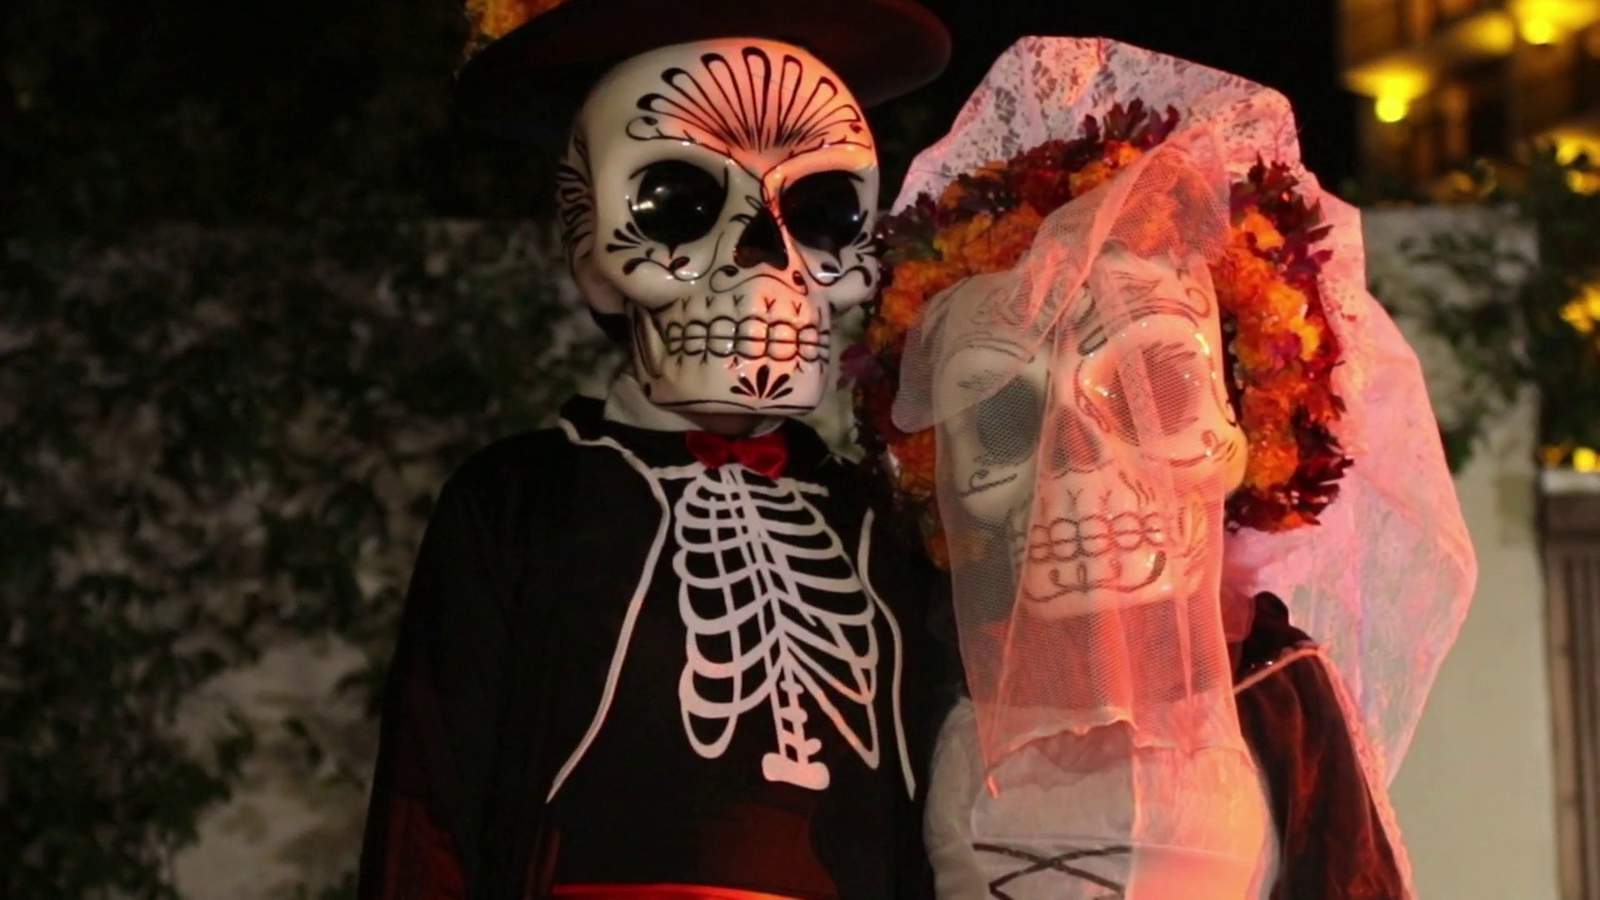 Symbolism behind Calavera in Day of the Dead traditions